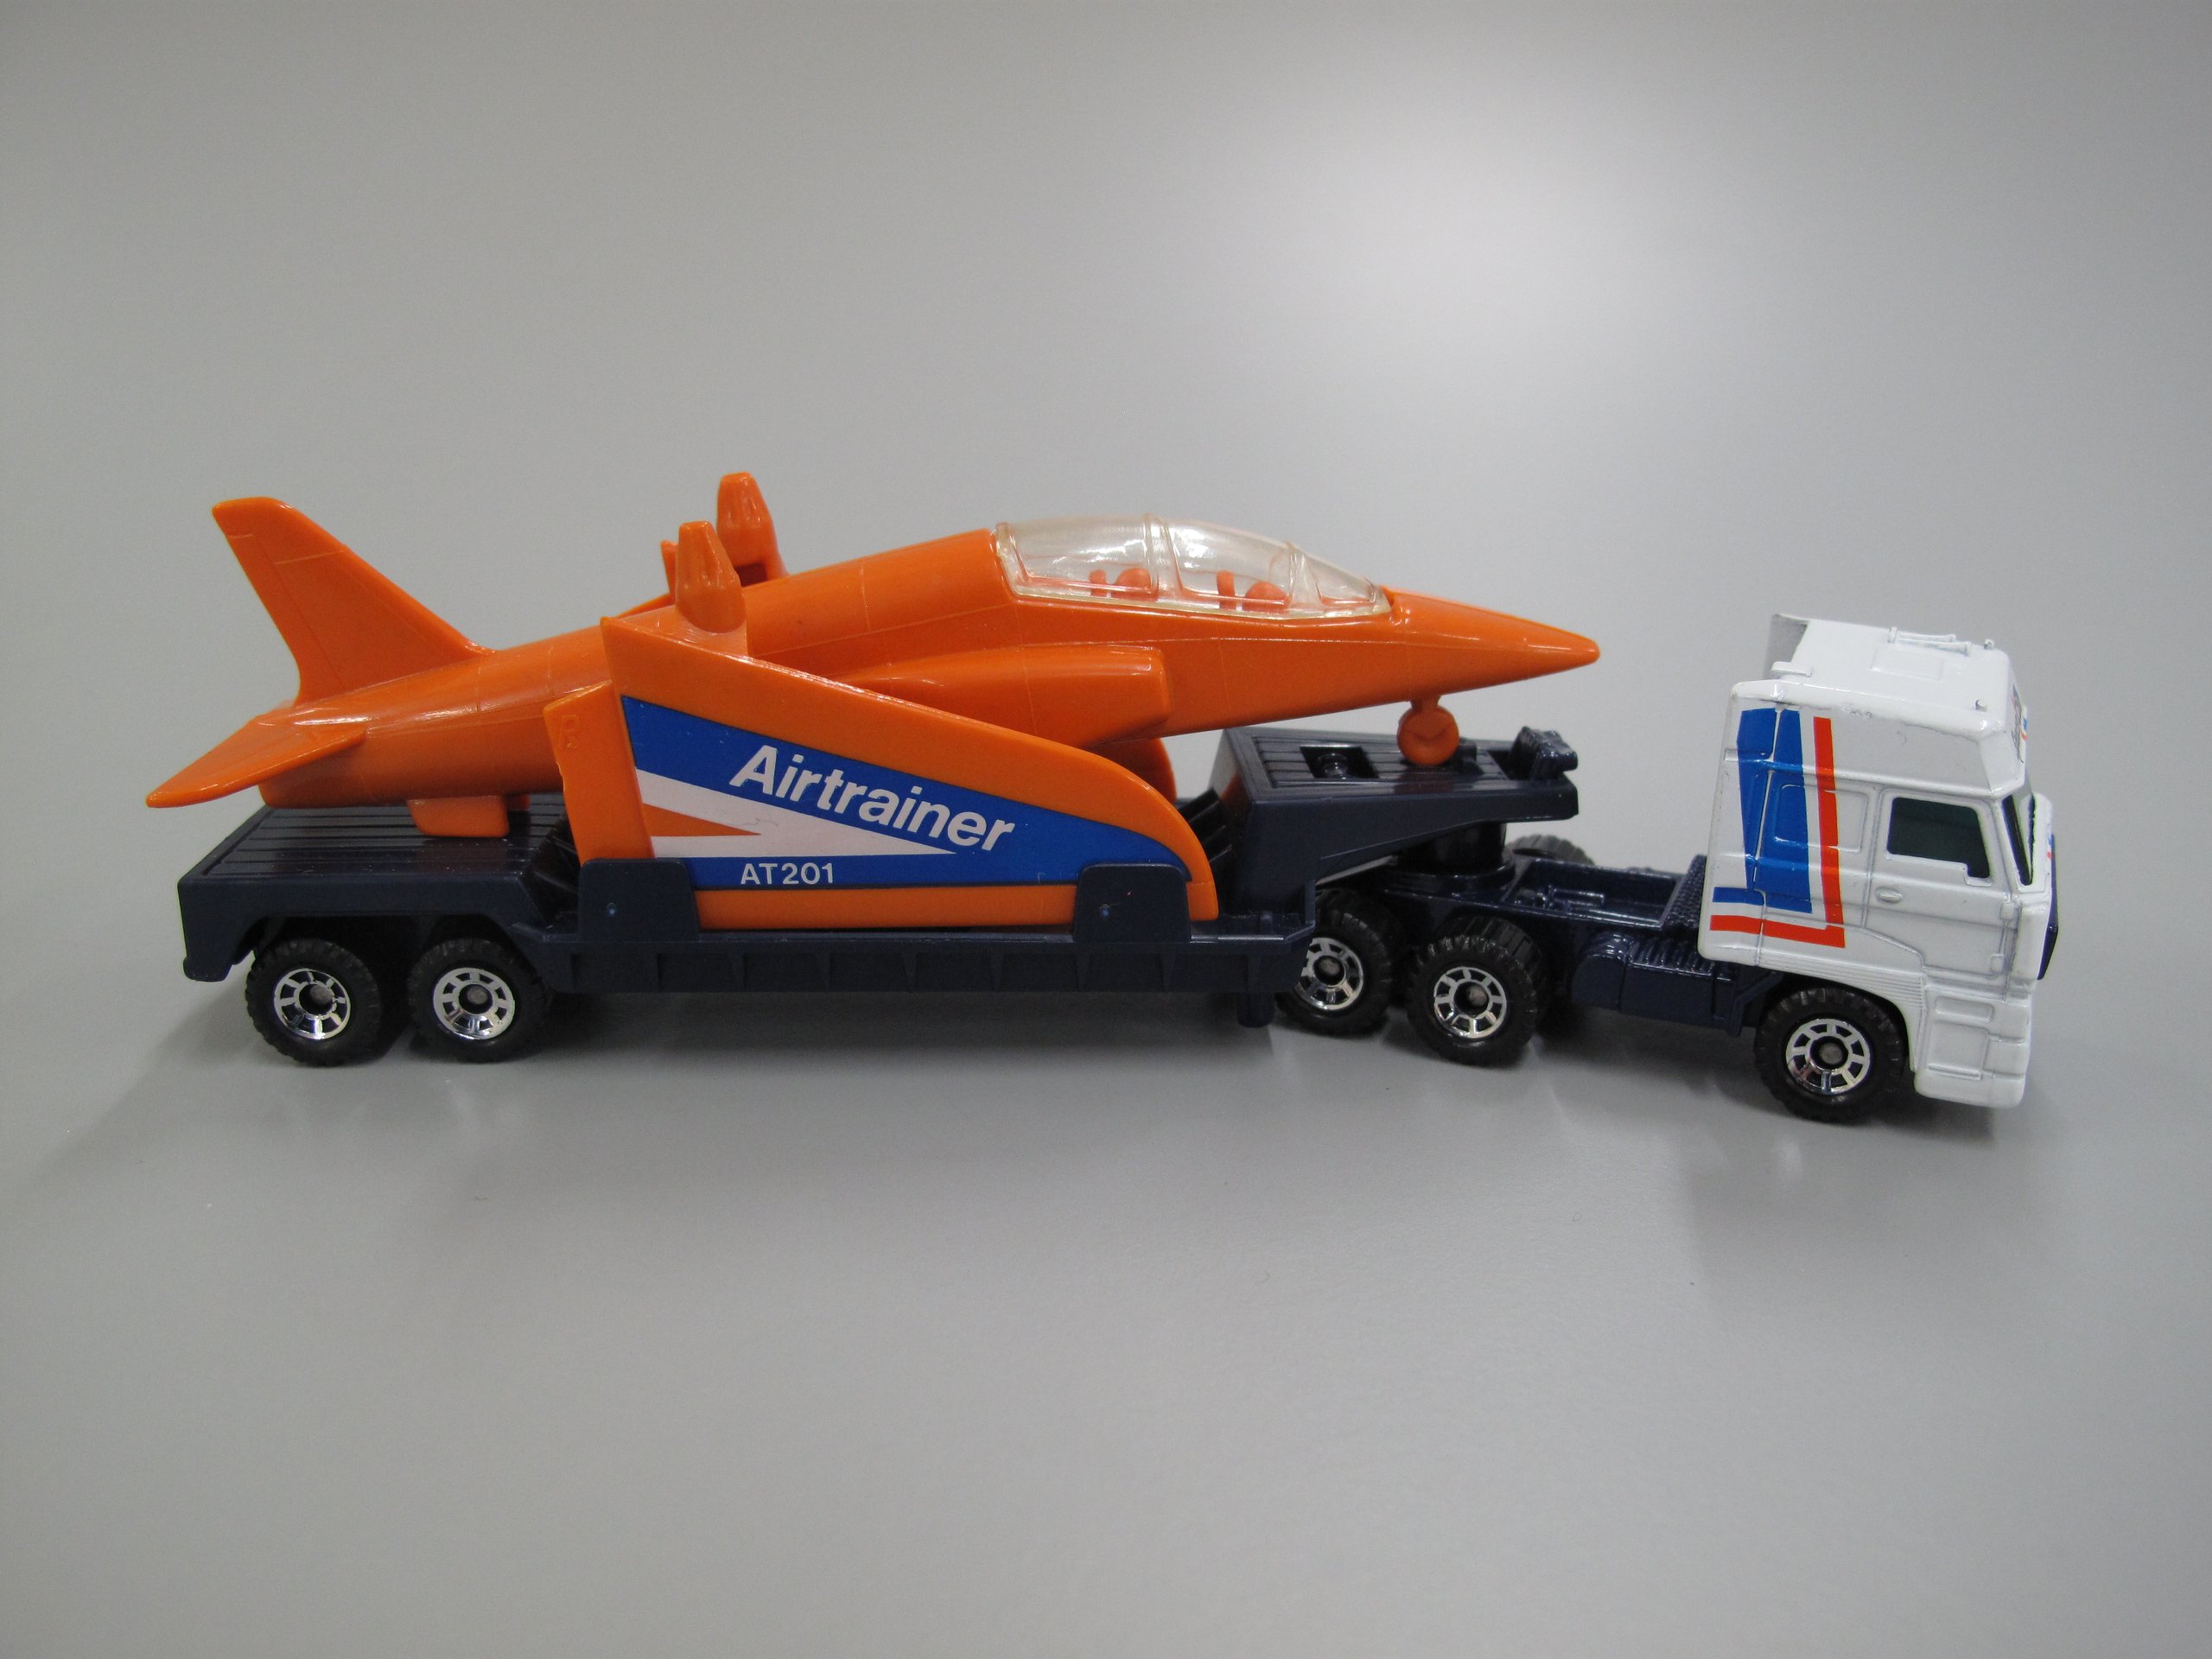 Matchbox DAF Space Cab 3300 toy prime mover